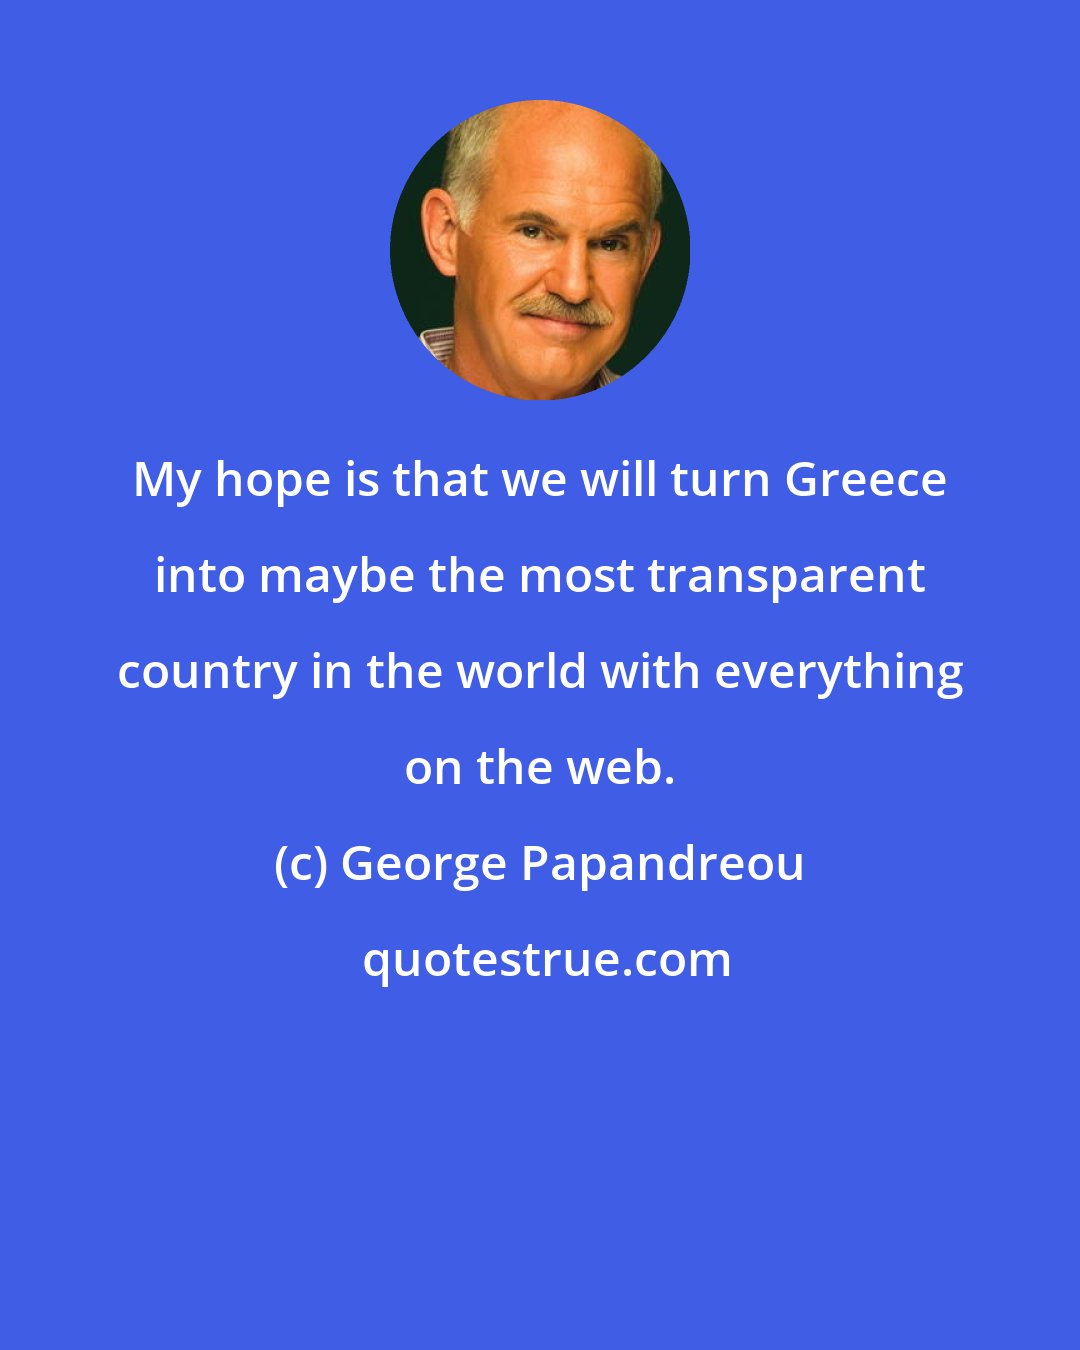 George Papandreou: My hope is that we will turn Greece into maybe the most transparent country in the world with everything on the web.